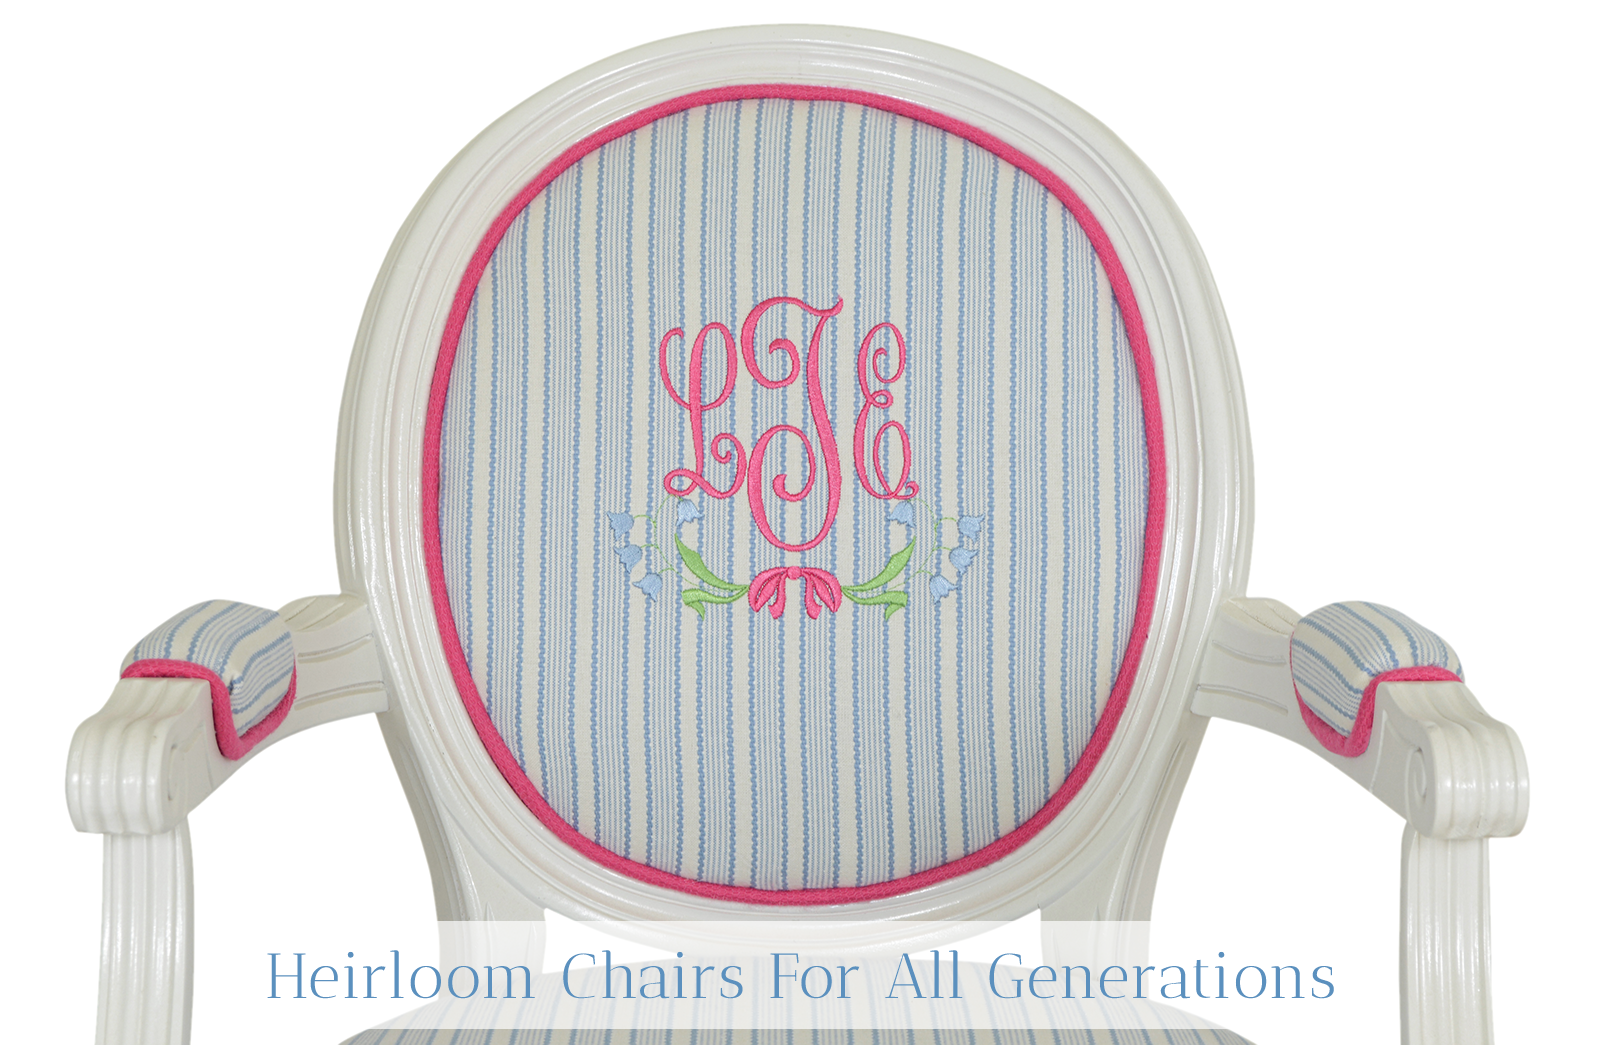 Little+Sits+chair+with+blue+and+white+stripe+fabric,+bright+pink+welt,+and+bright+pink+monogram+with+flowers..png